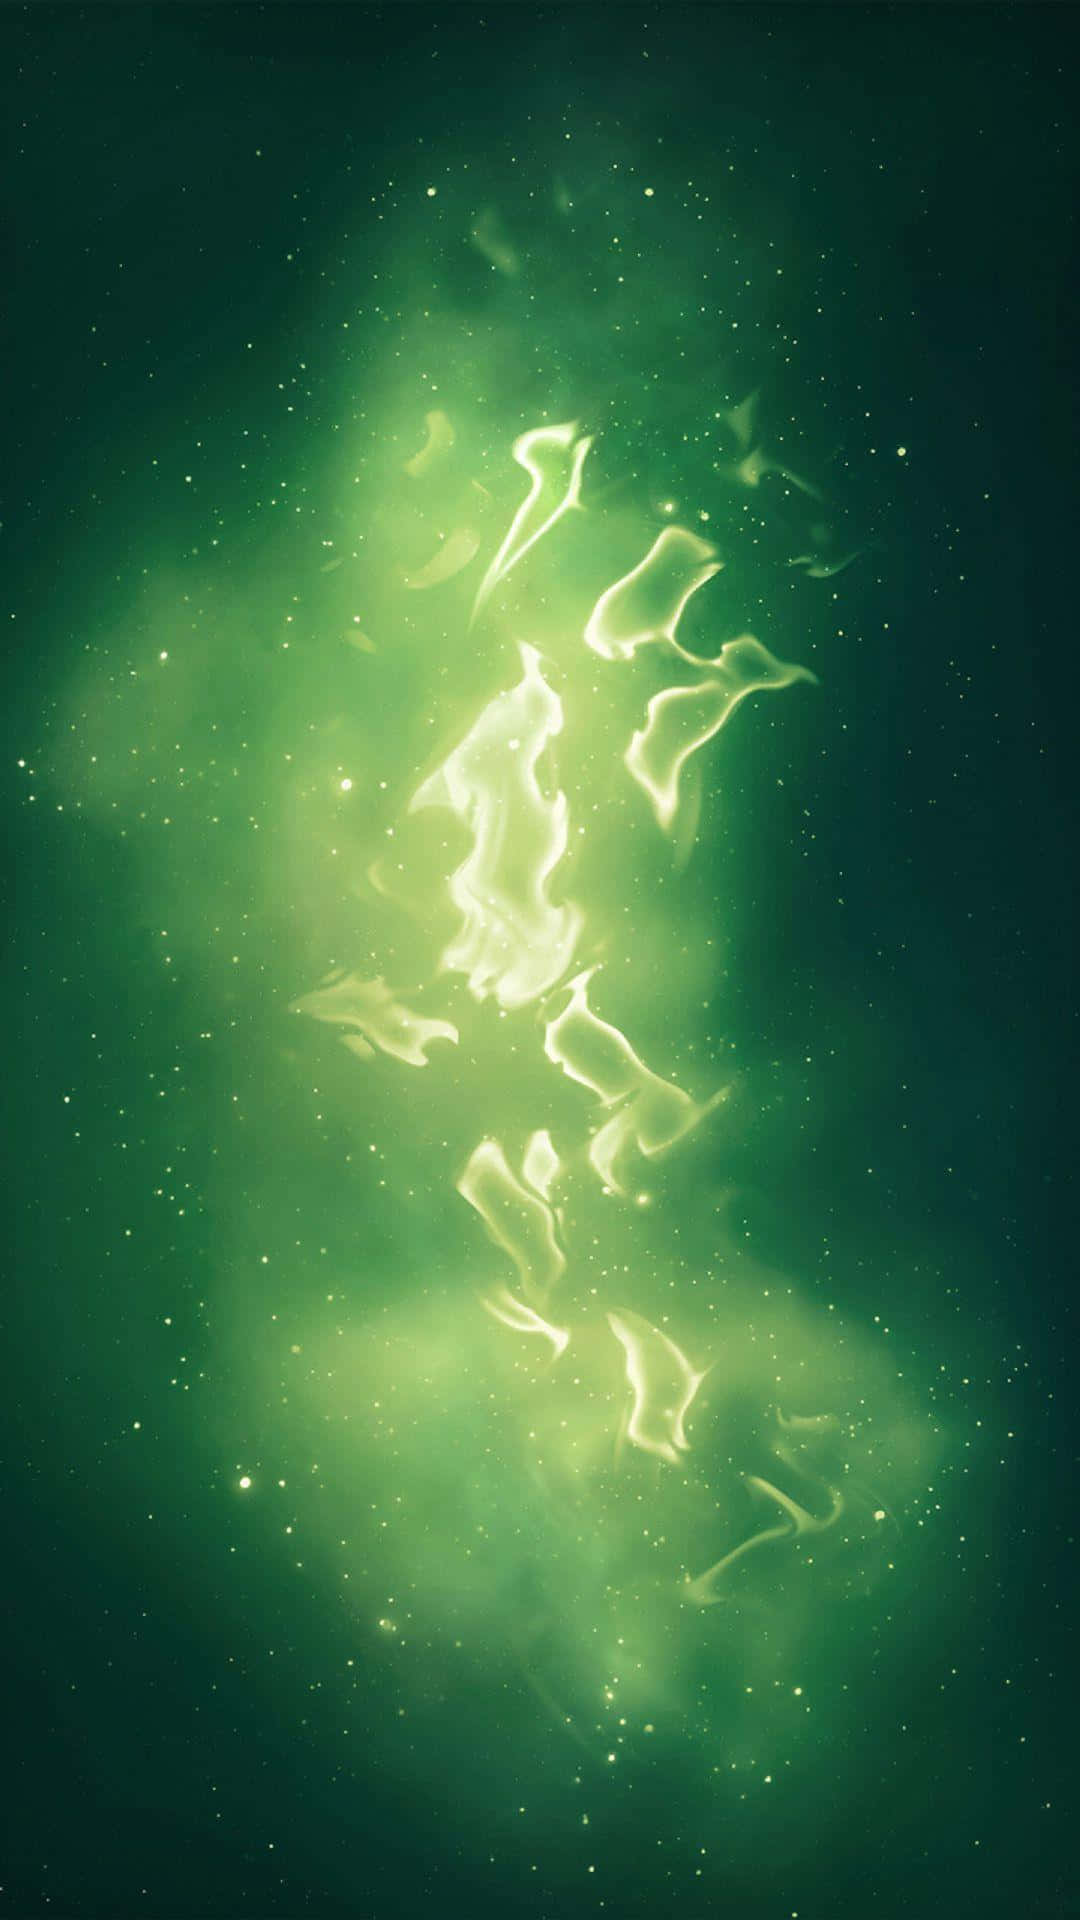 Dive into an Out of this World Exploration through Green Galaxy Wallpaper